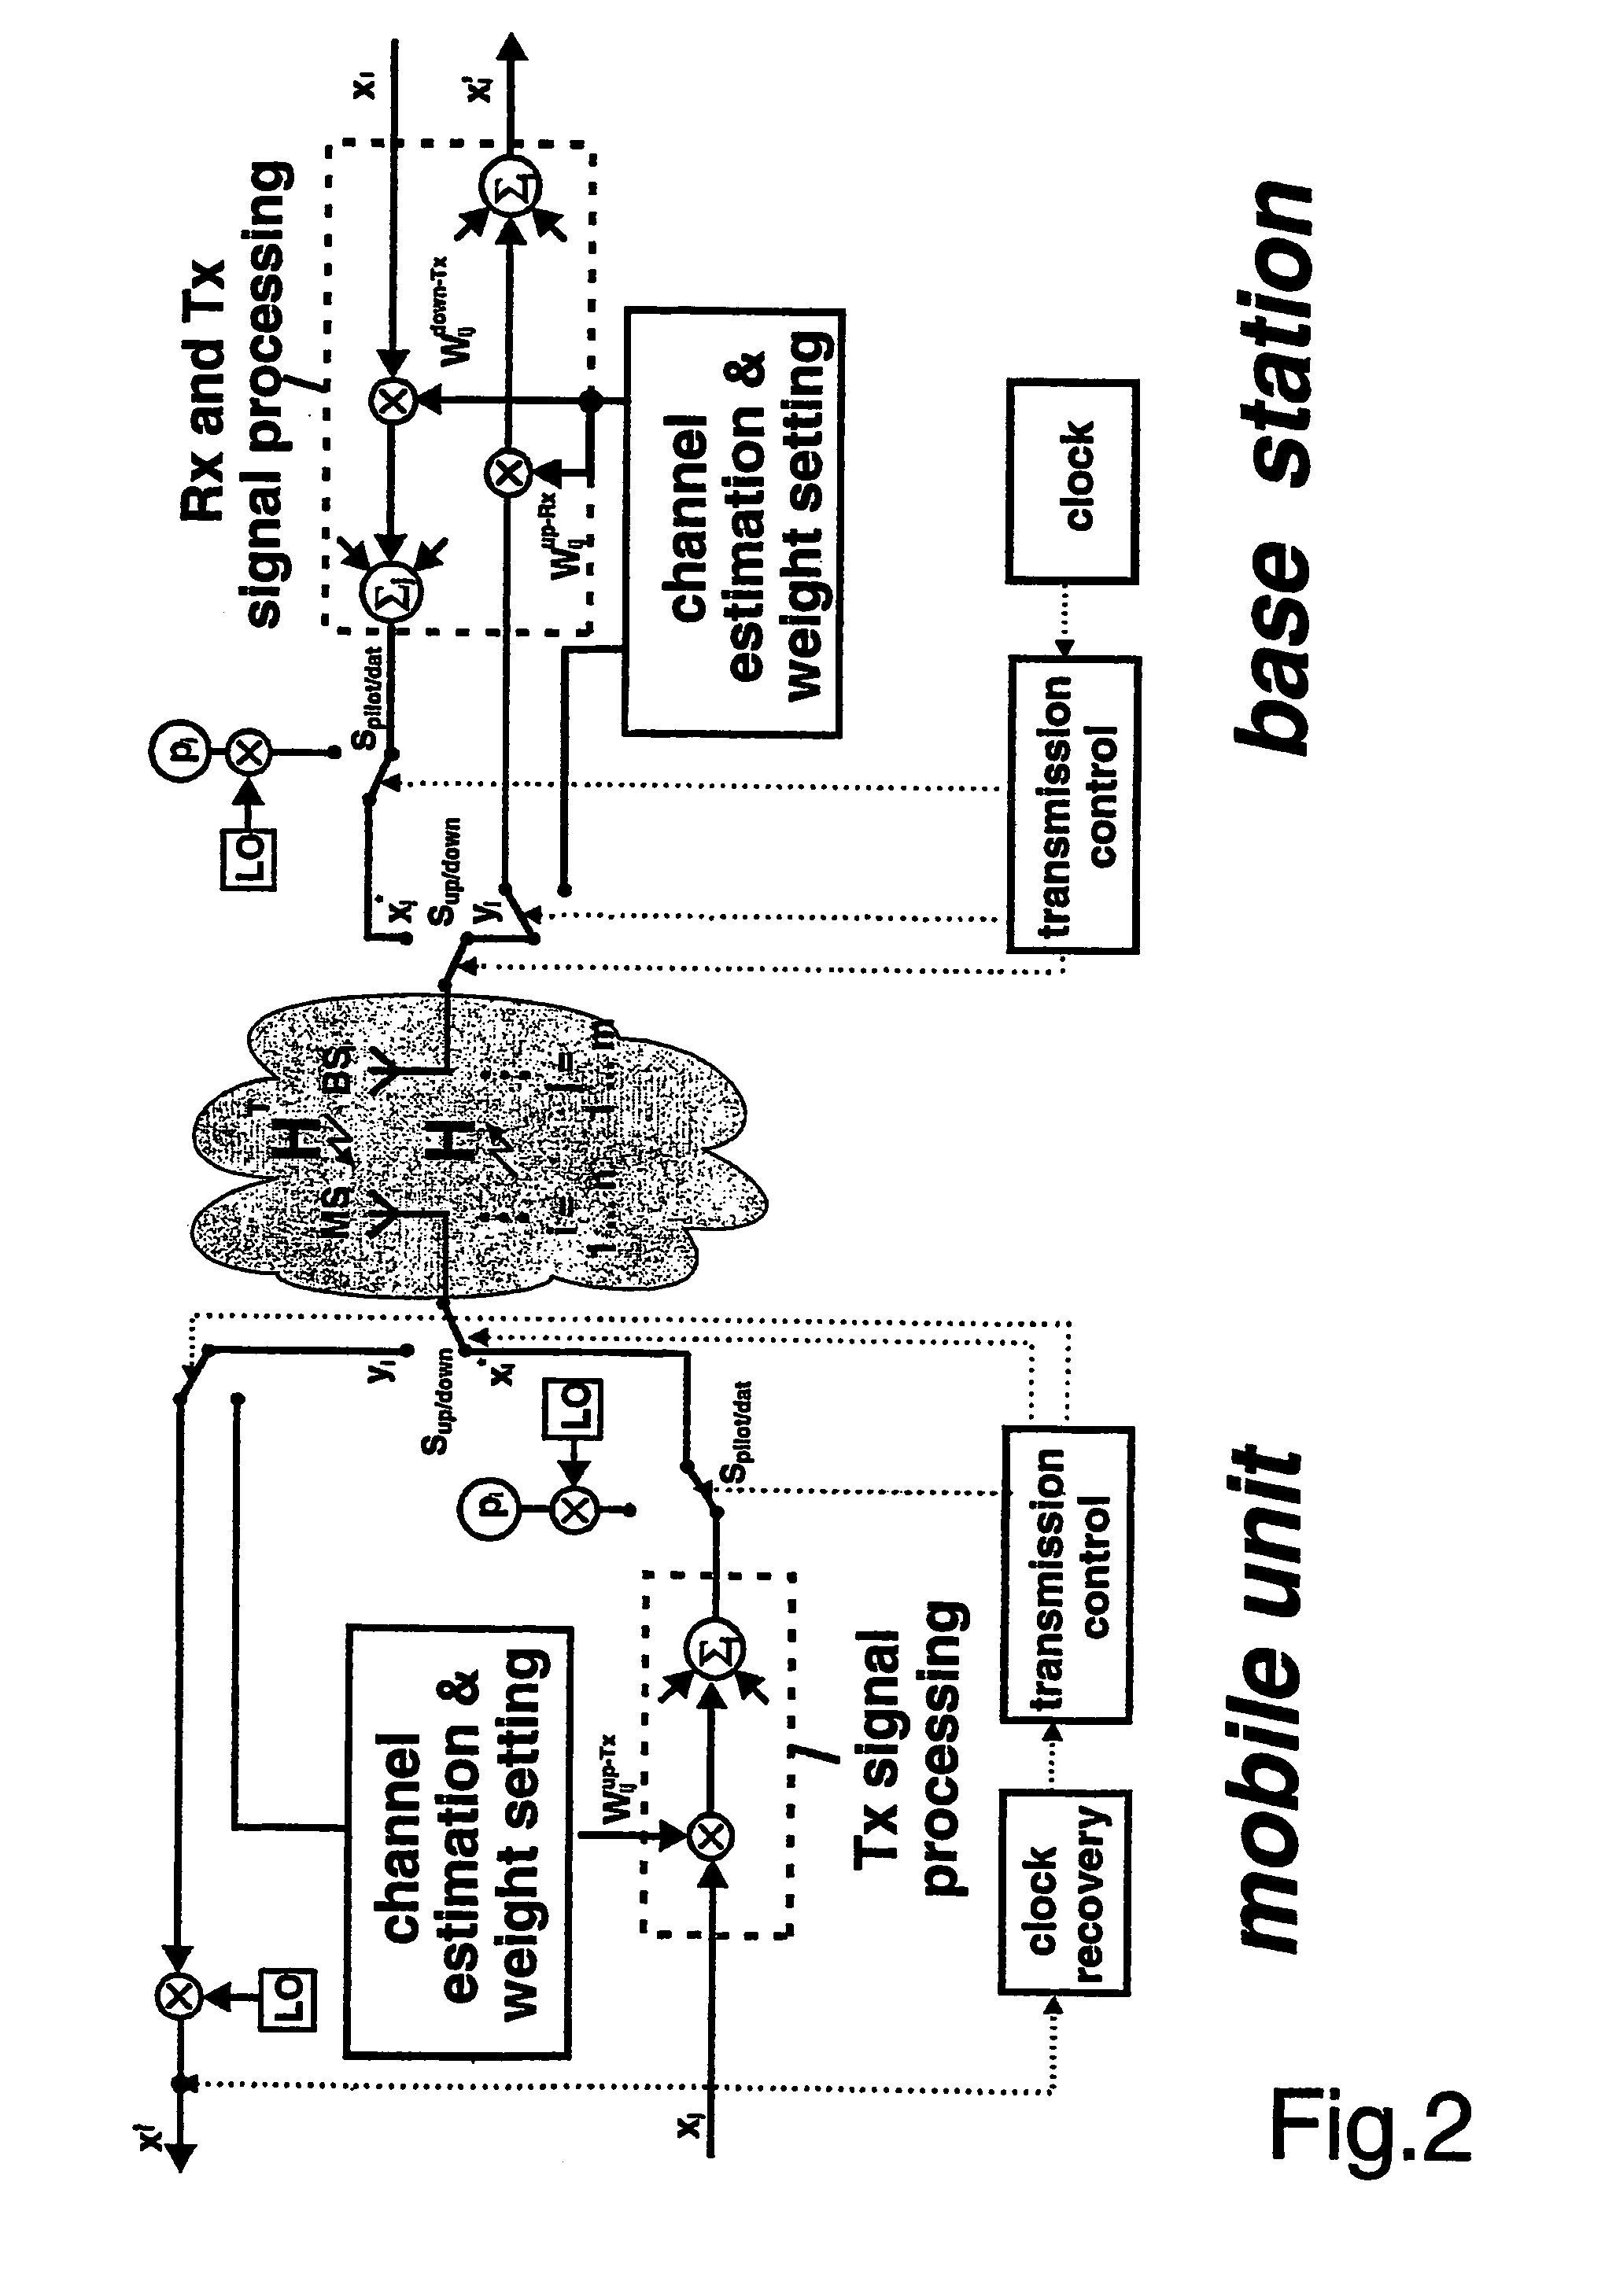 Adaptive signal processing method in a MIMO-system